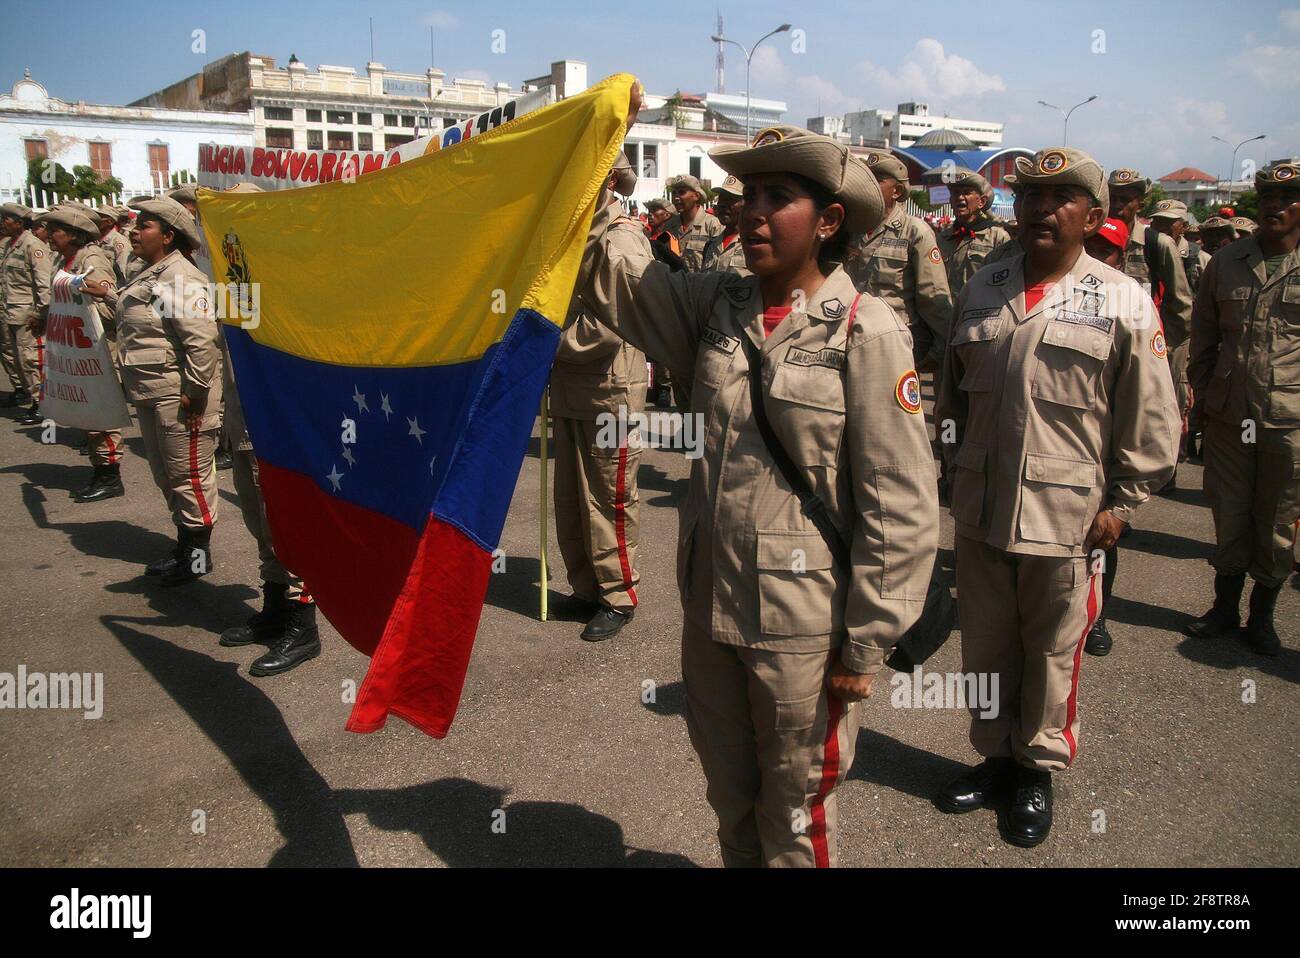 On Tuesday, April 14, 2021, in the city of Caracas, Venezuela, the general commander of the Bolivarian National Militia Bernal Martínez reported that 1,000 members of the militia will carry out humanitarian work and care in communities of Apure for the protection of the people. On the instructions of orders from President Nicolás Maduro,  a special humanitarian force to protect the communities in this border region recently affected with strong clashes between the Venezuelan military and irregular groups. (Photo by Humberto Matheus/Sipa USA) Stock Photo